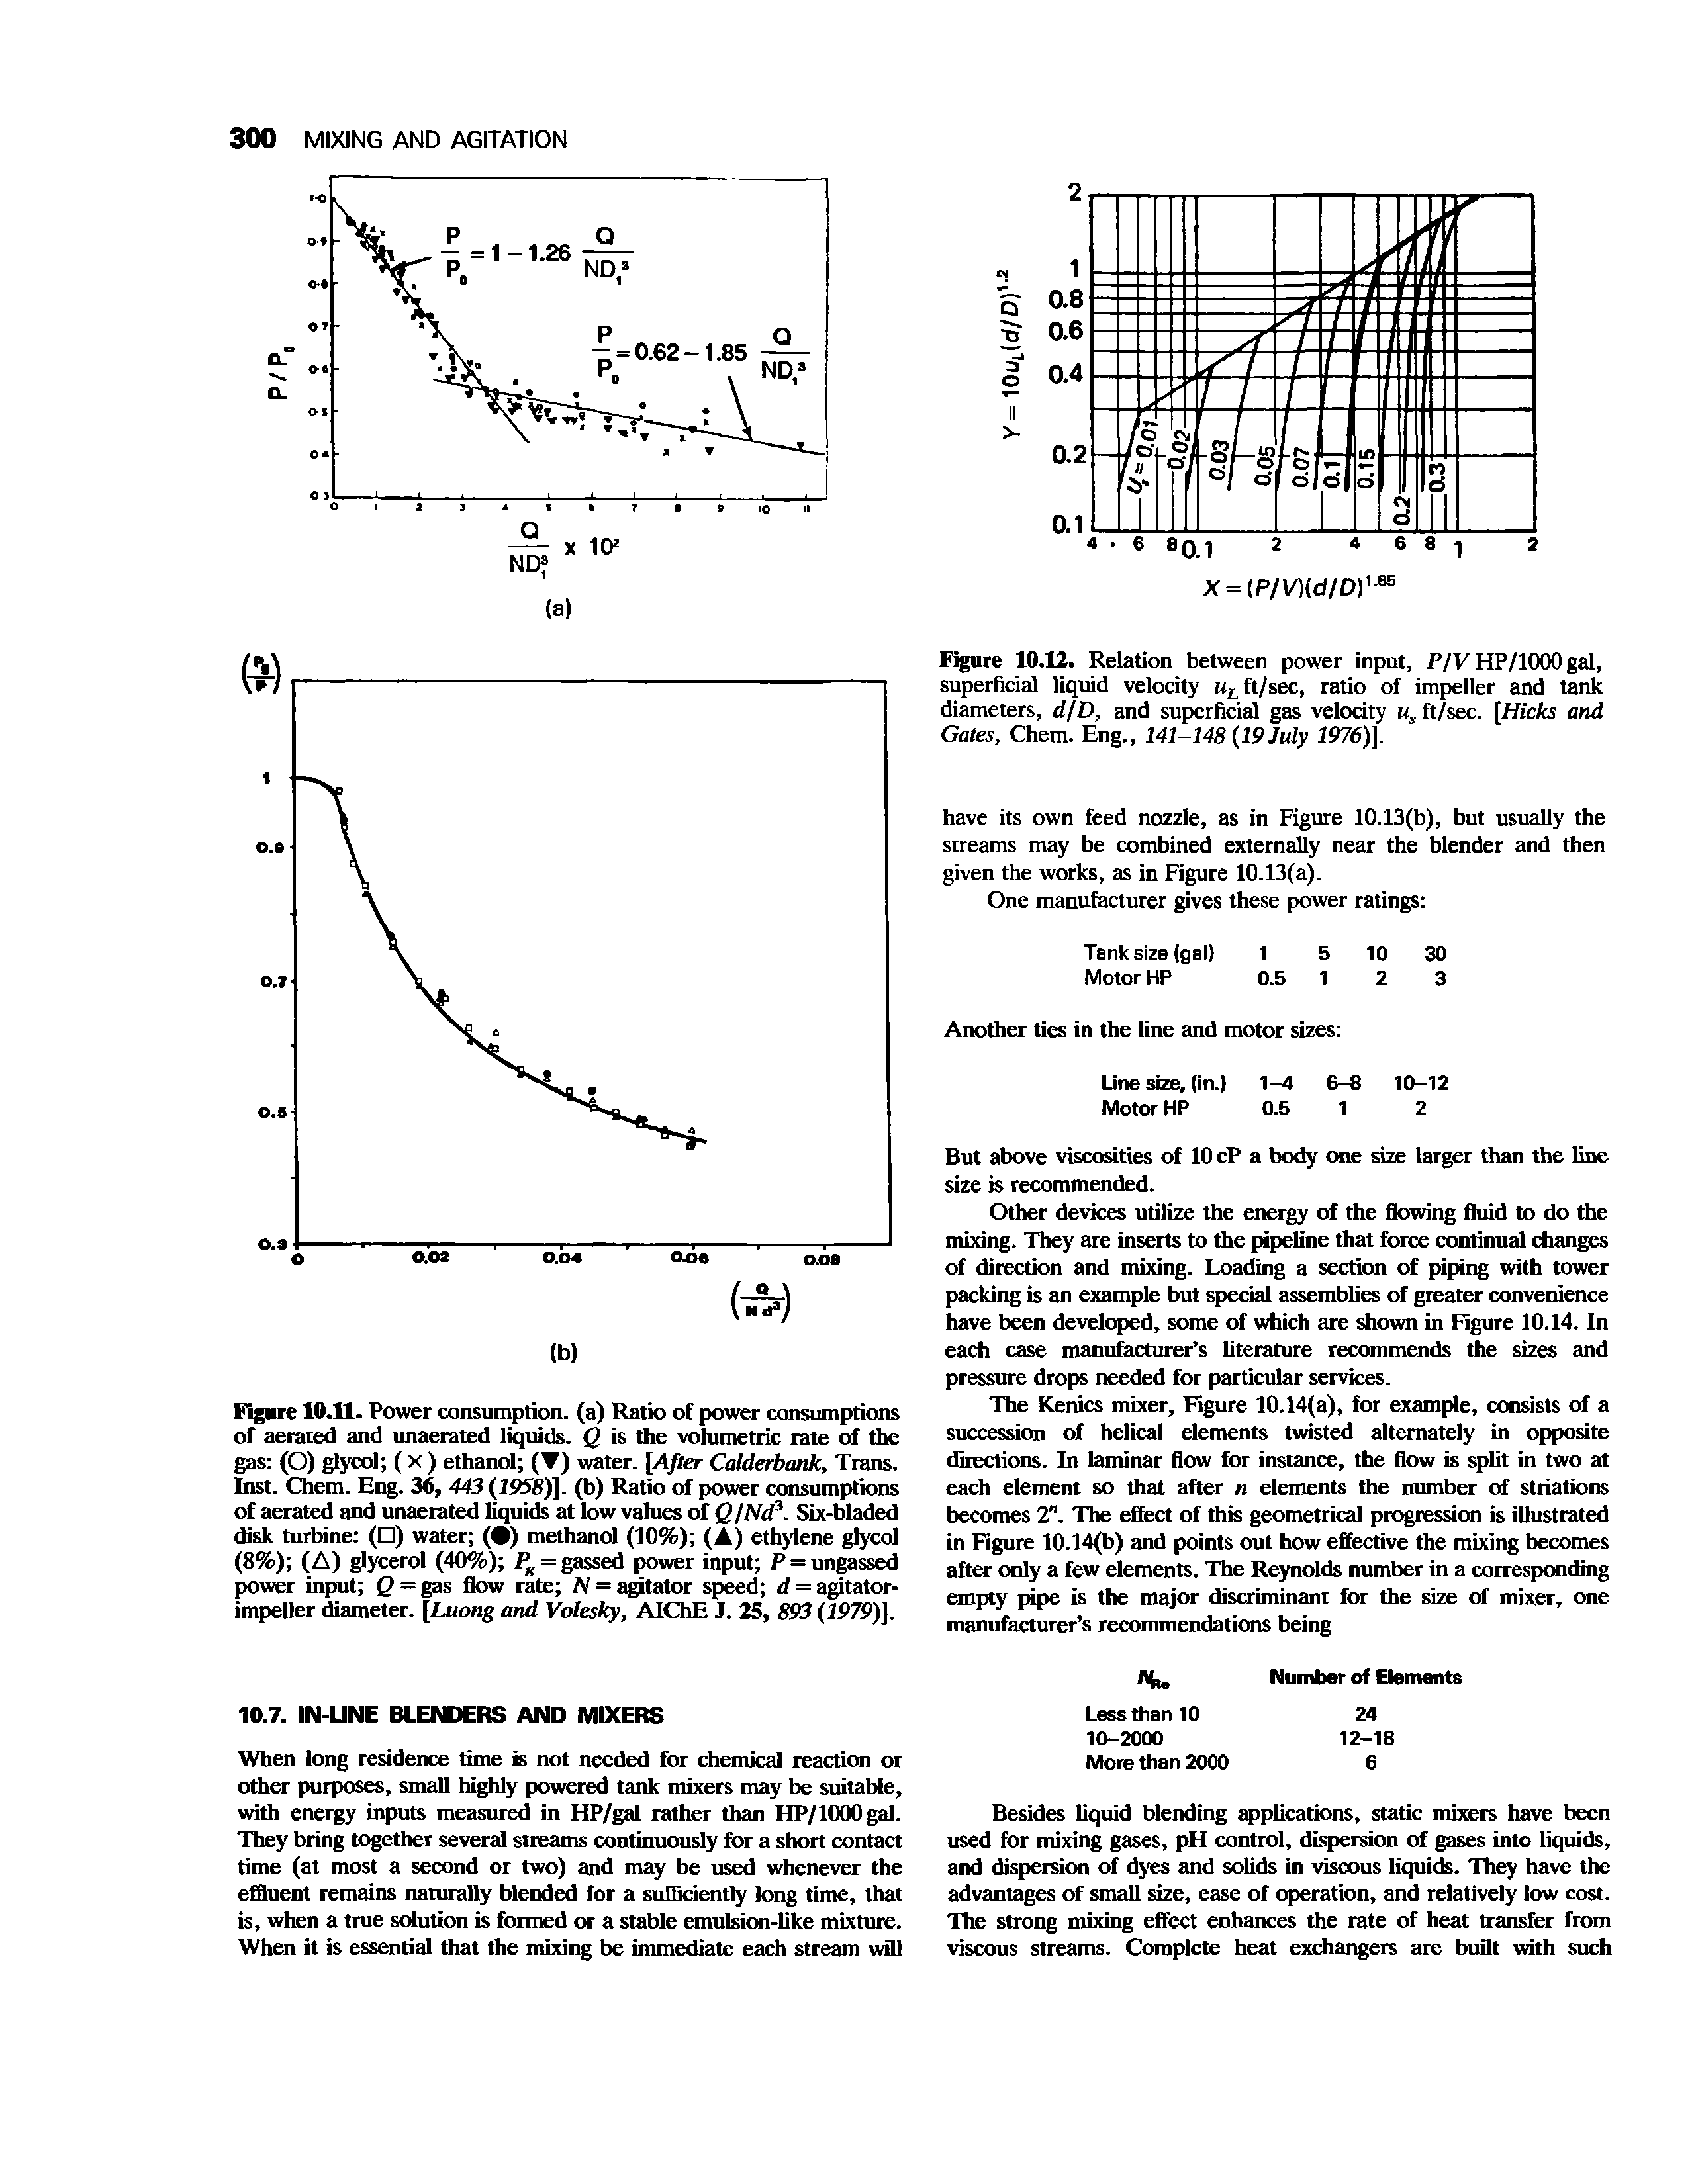 Figure 10.11. Power consumption, (a) Ratio of power consumptions of aerated and unaerated liquids. Q is the volumetric rate of the gas (O) glycol ( X ) ethanol ( ) water. [After Calderbank, Trans. Inst. Chem. Eng. 36, 443 (1958)]. (b) Ratio of power consumptions of aerated and unaerated liquids at low values otQ/Nd3. Six-bladed disk turbine ( ) water ( ) methanol (10%) (A) ethylene glycol (8%) (A) glycerol (40%) Pg = gassed power input P = ungassed power input Q = gas flow rate IV = agitator speed d = agitator-impeller diameter. [Luong and Volesky, AIChE J. 25, 893 (1979)].